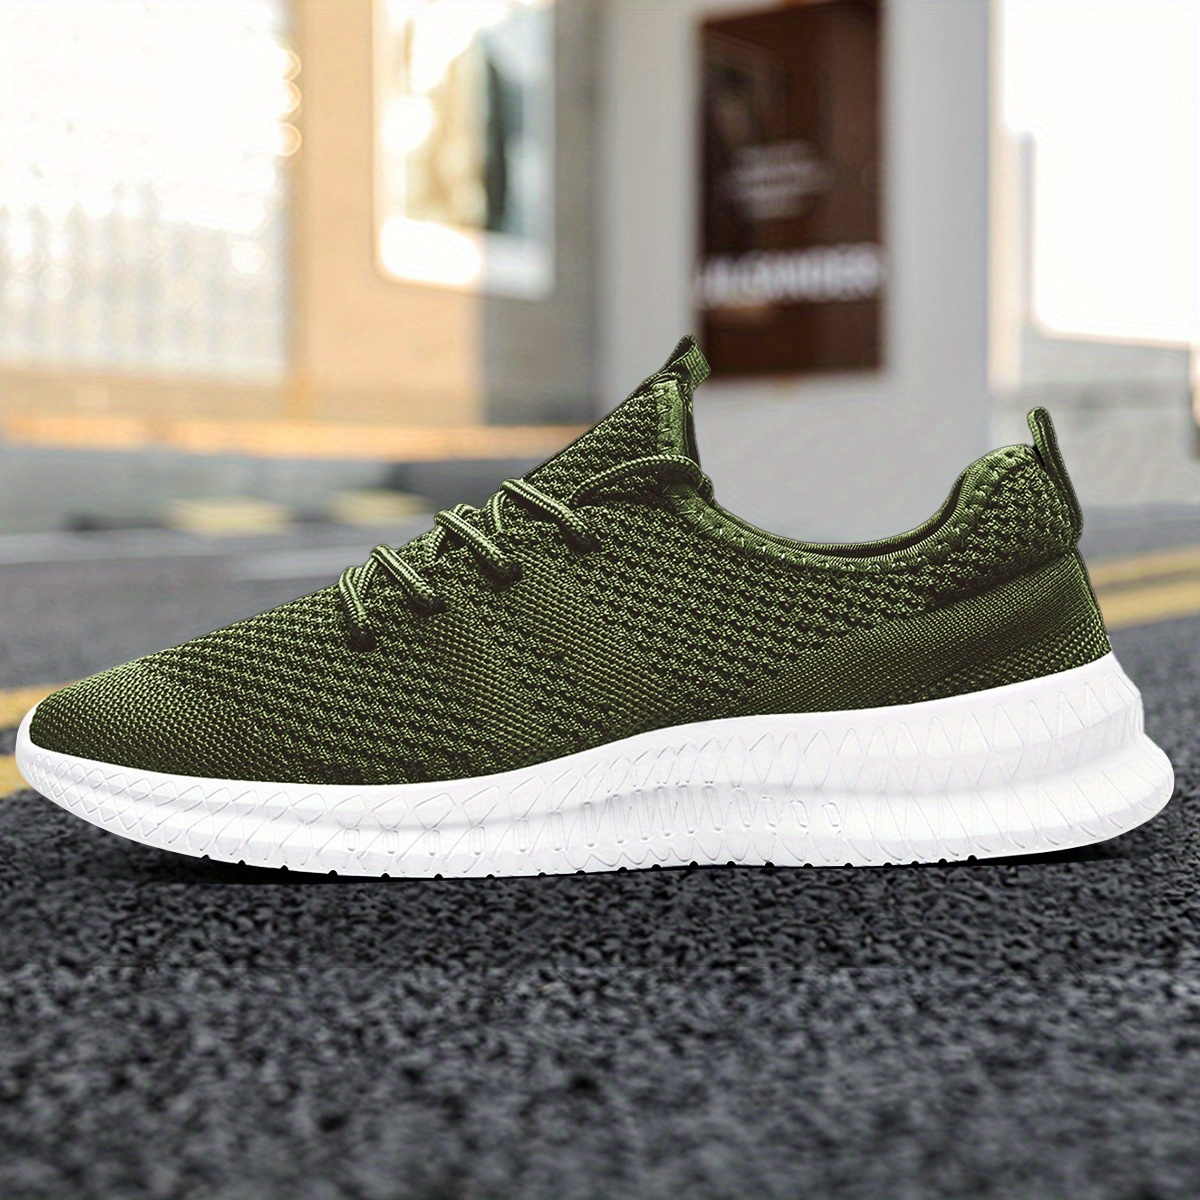 mens trendy breathable lace up knit sneakers with assorted colors casual outdoor running walking shoes details 25